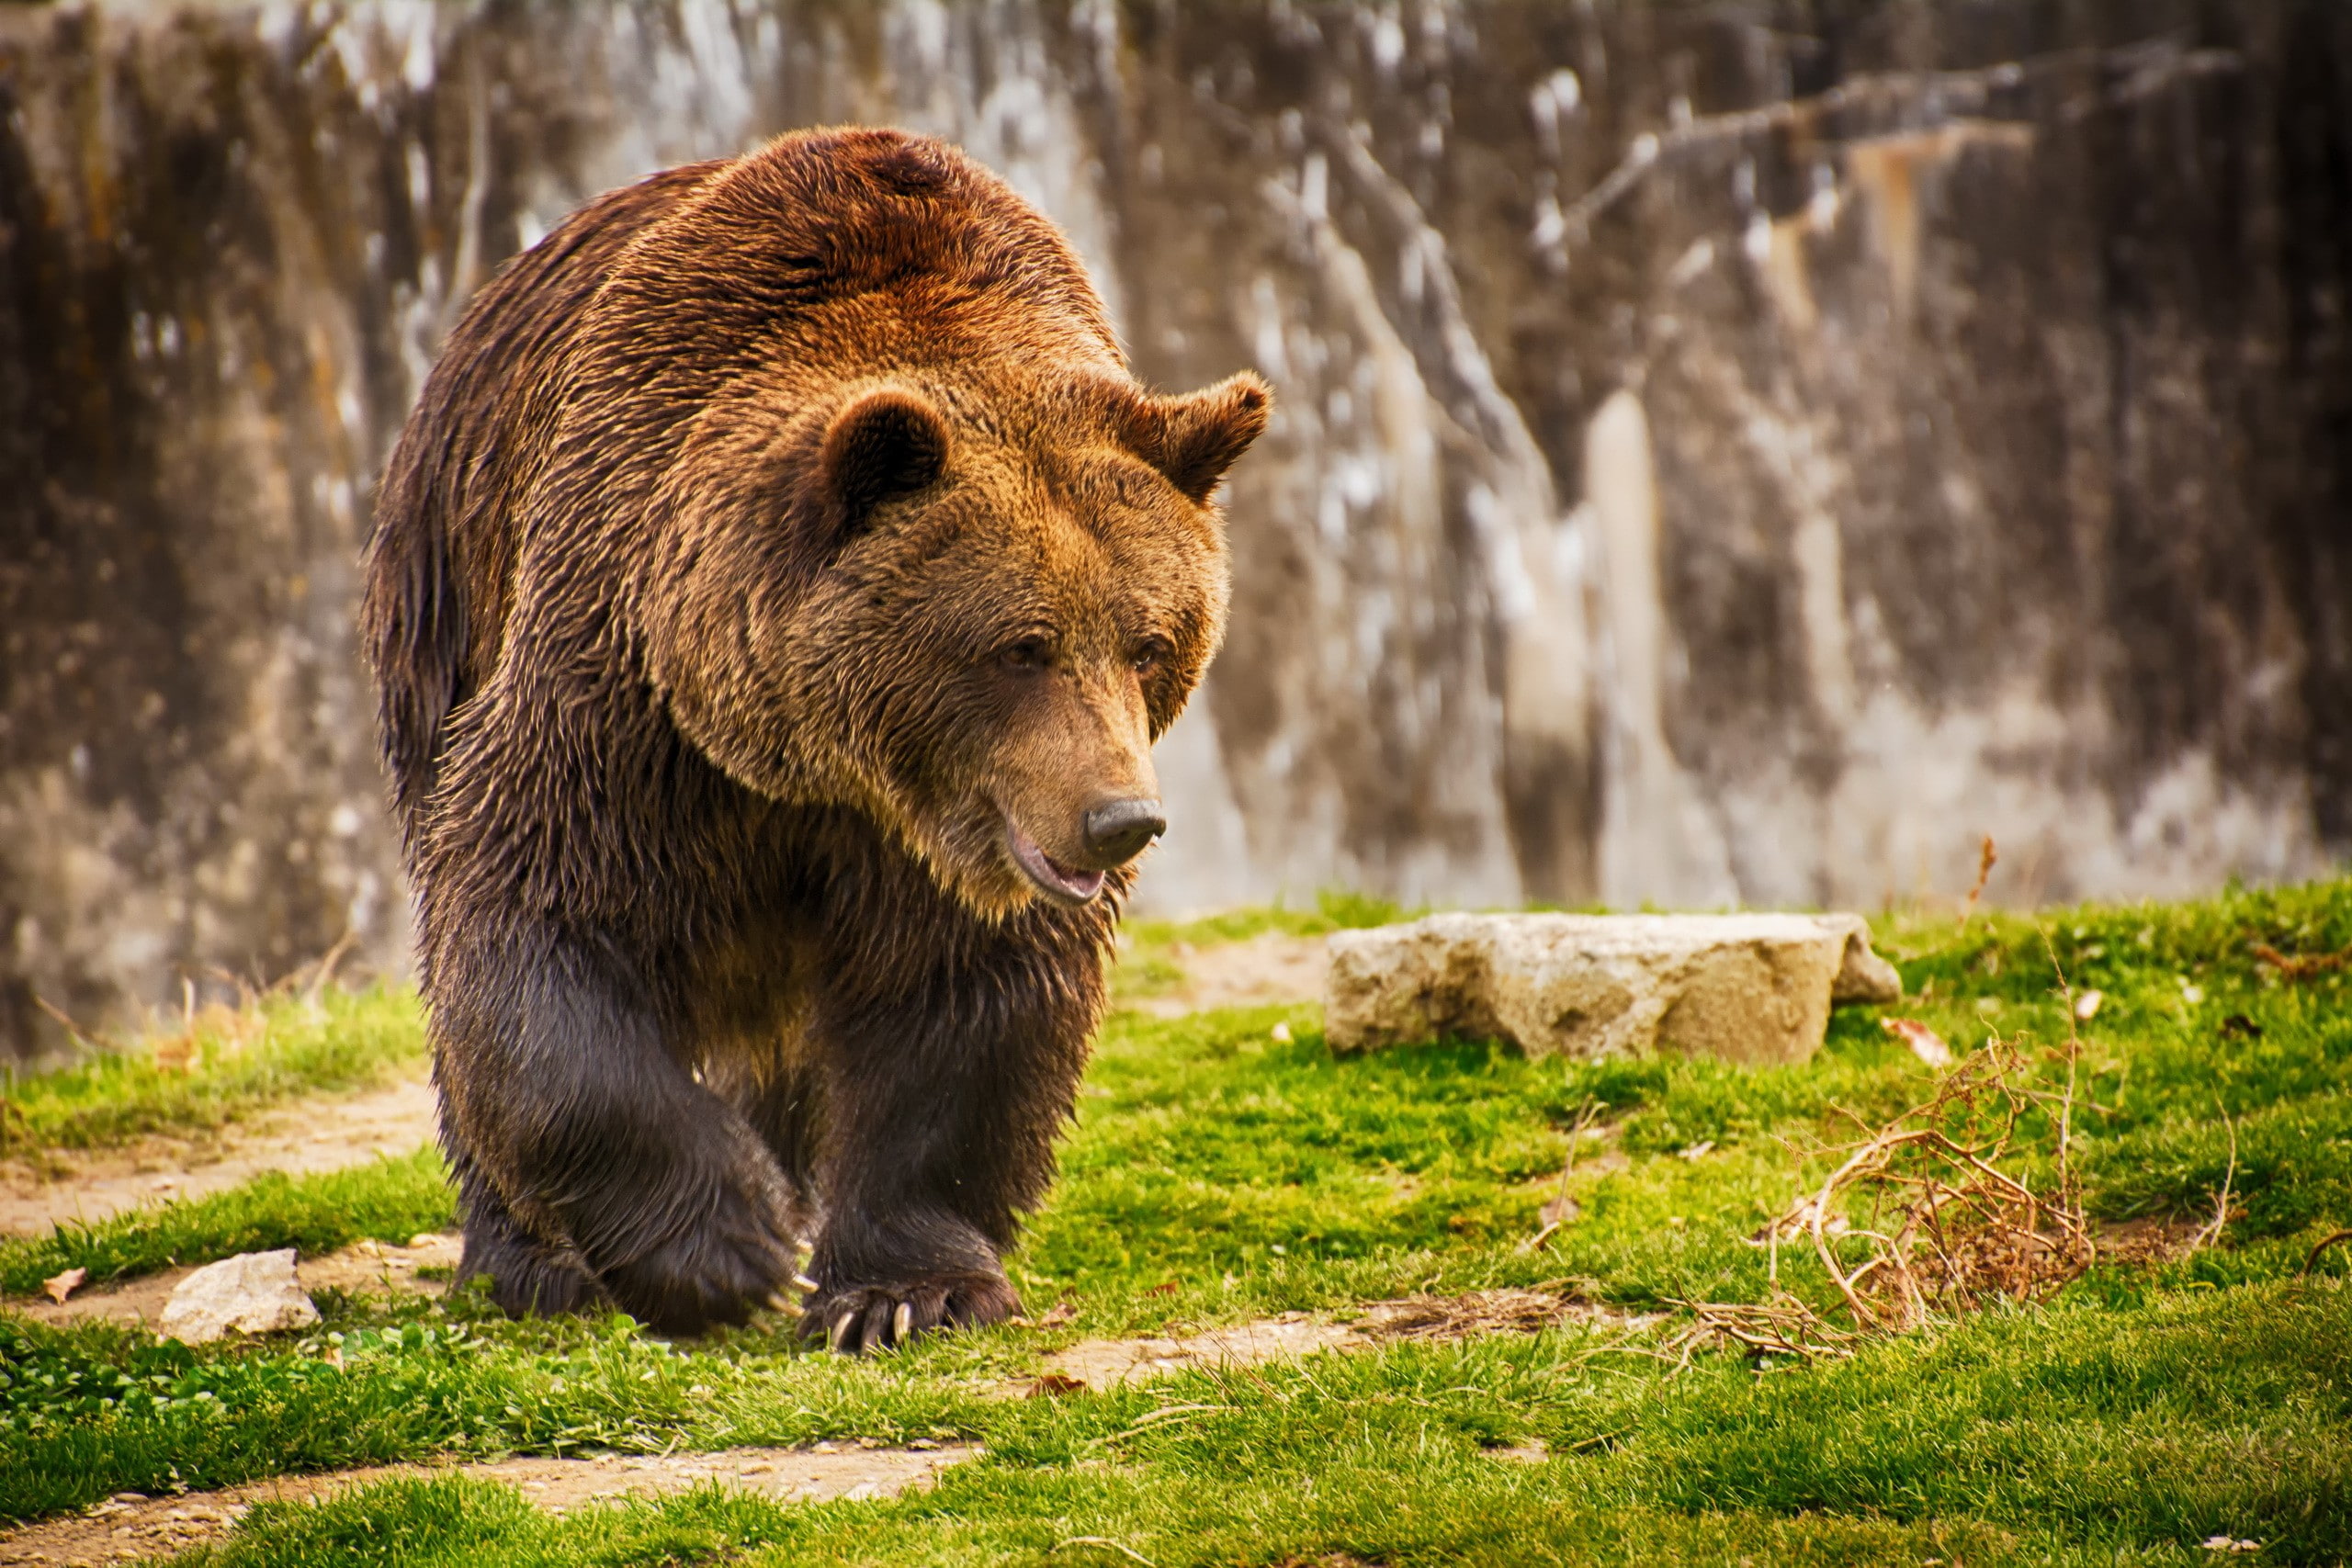 Big Bear in nature, brown grizzly bear, background